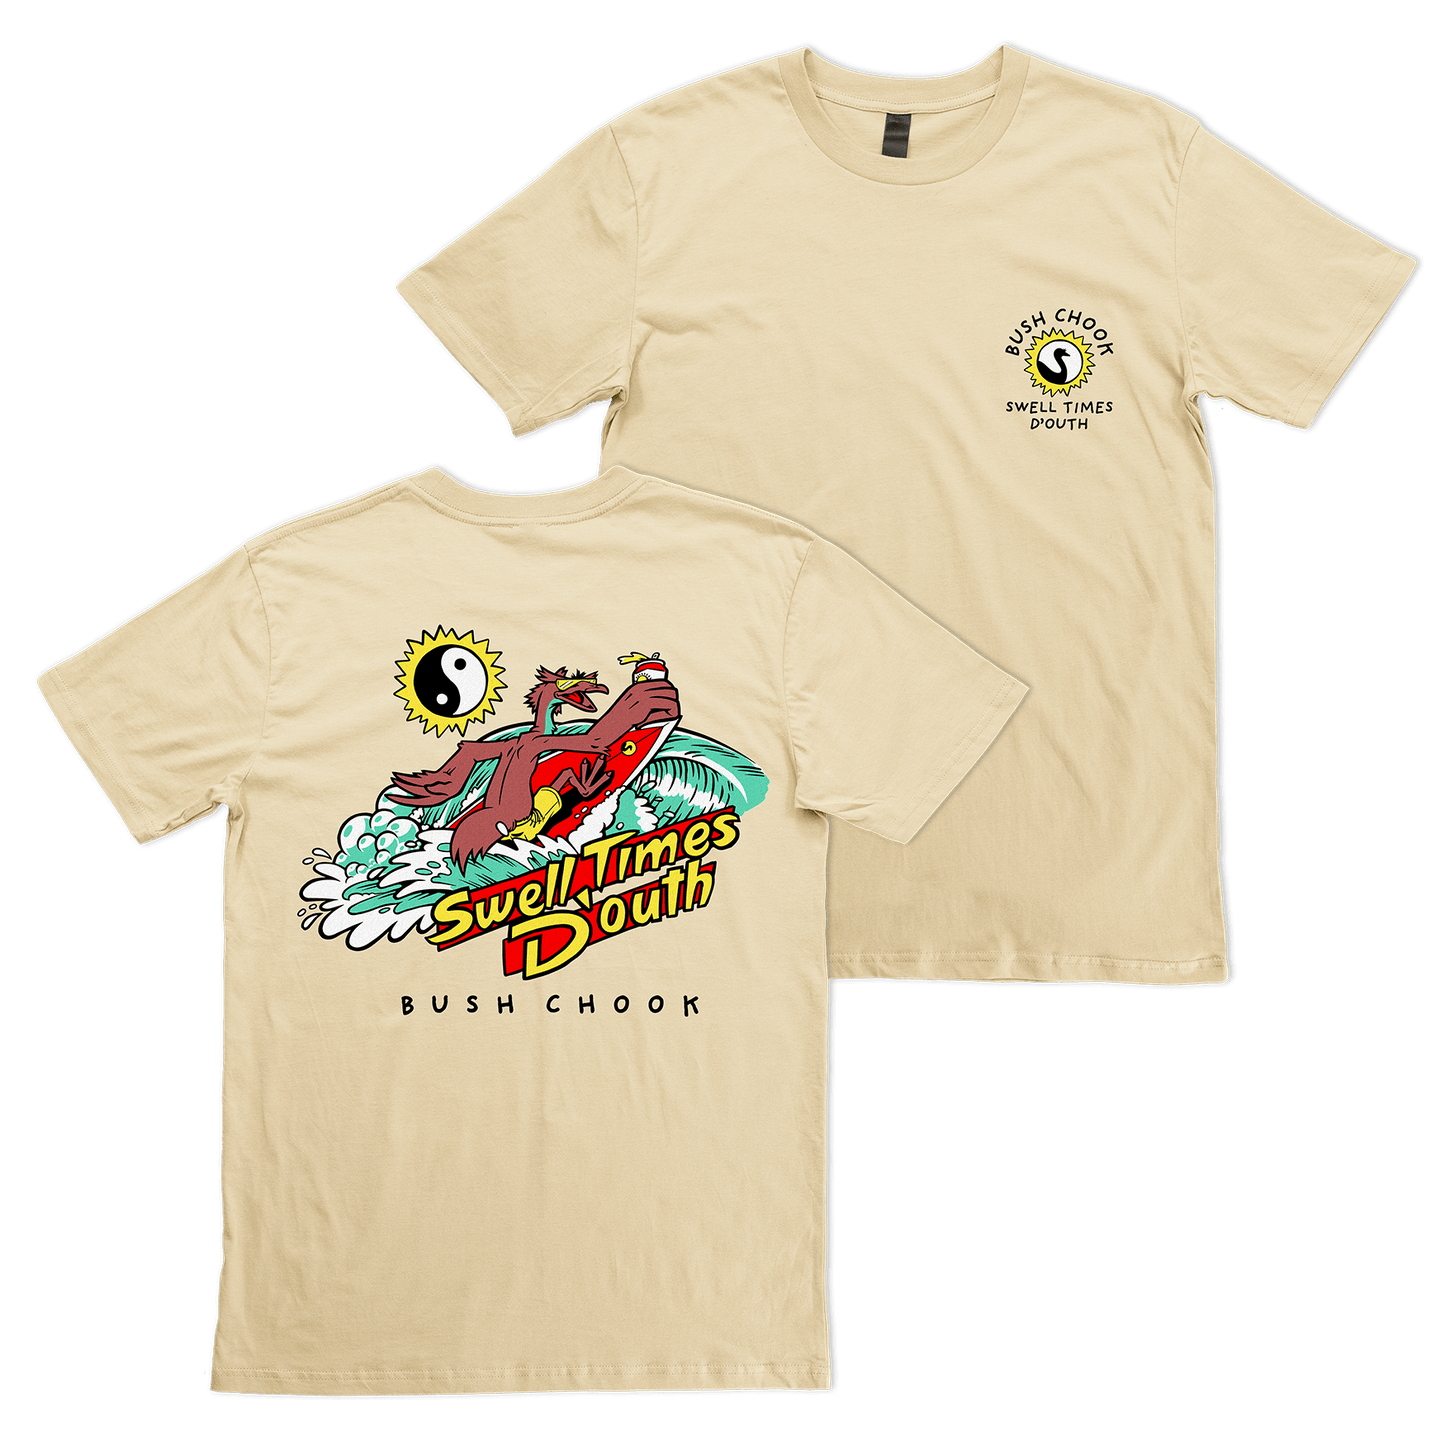 Swell Times D'outh Tee Tan